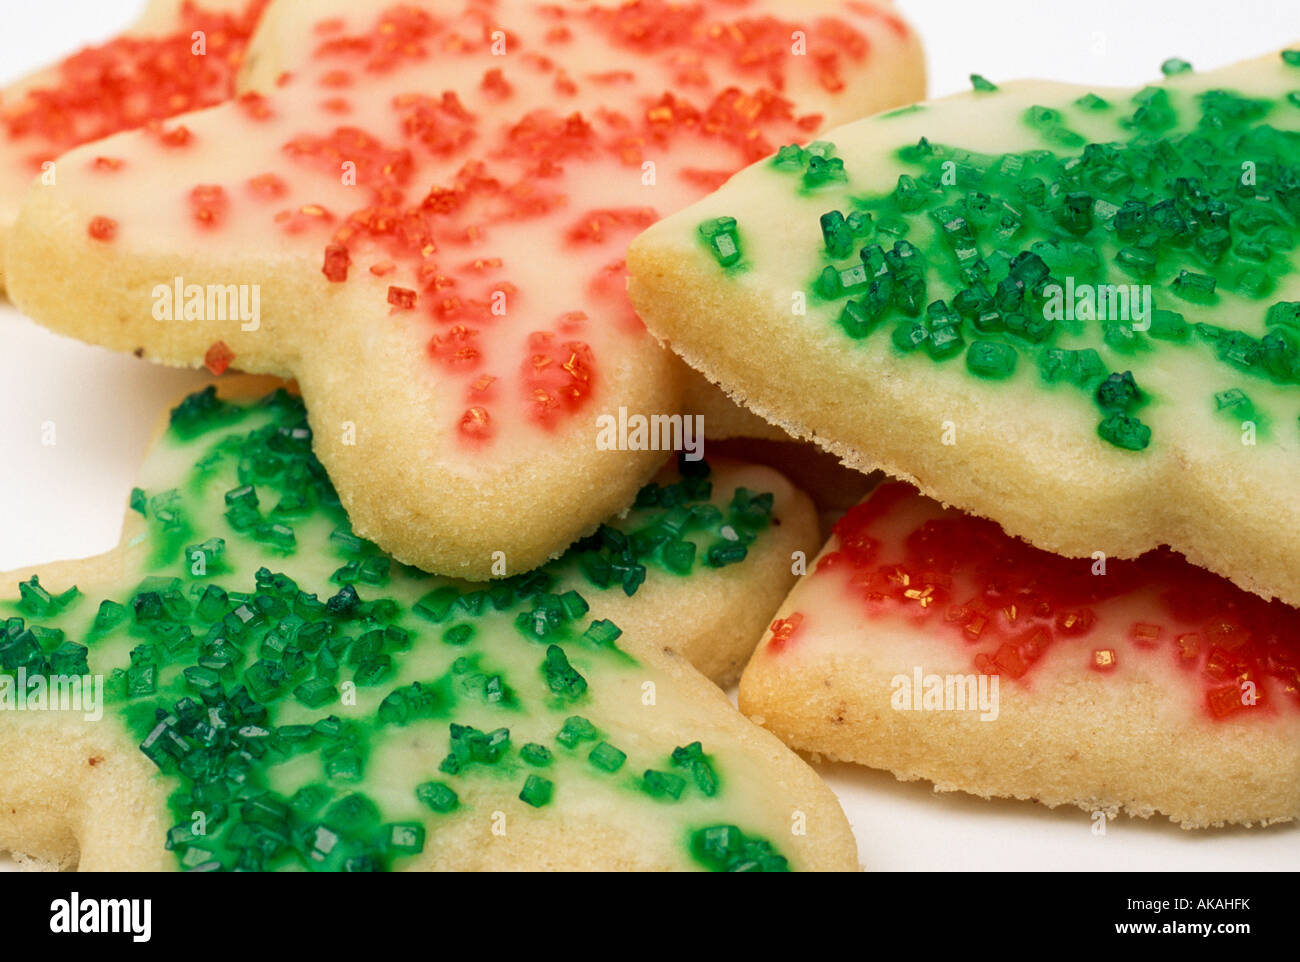 Cookies with sprinkles Stock Photo